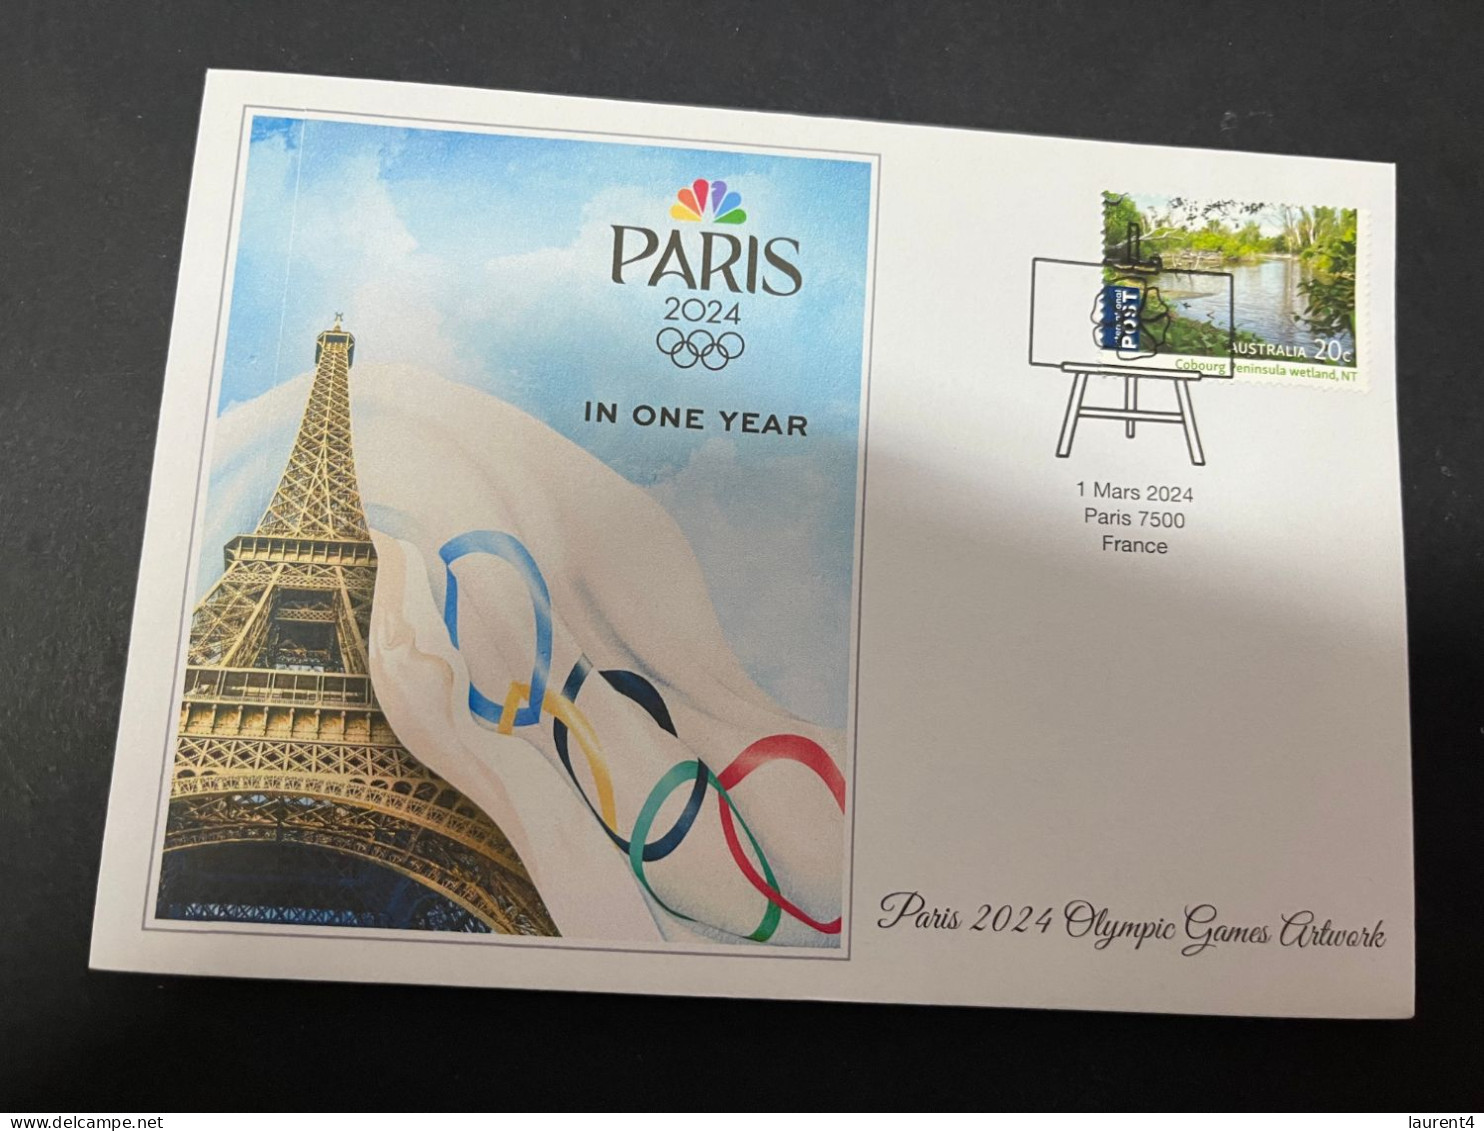 10-3-2024 (2 Y 37) Paris Olympic Games 2024 - 6 (of 12 Covers Series) For The Paris 2024 Olympic Games Artwork - Summer 2024: Paris